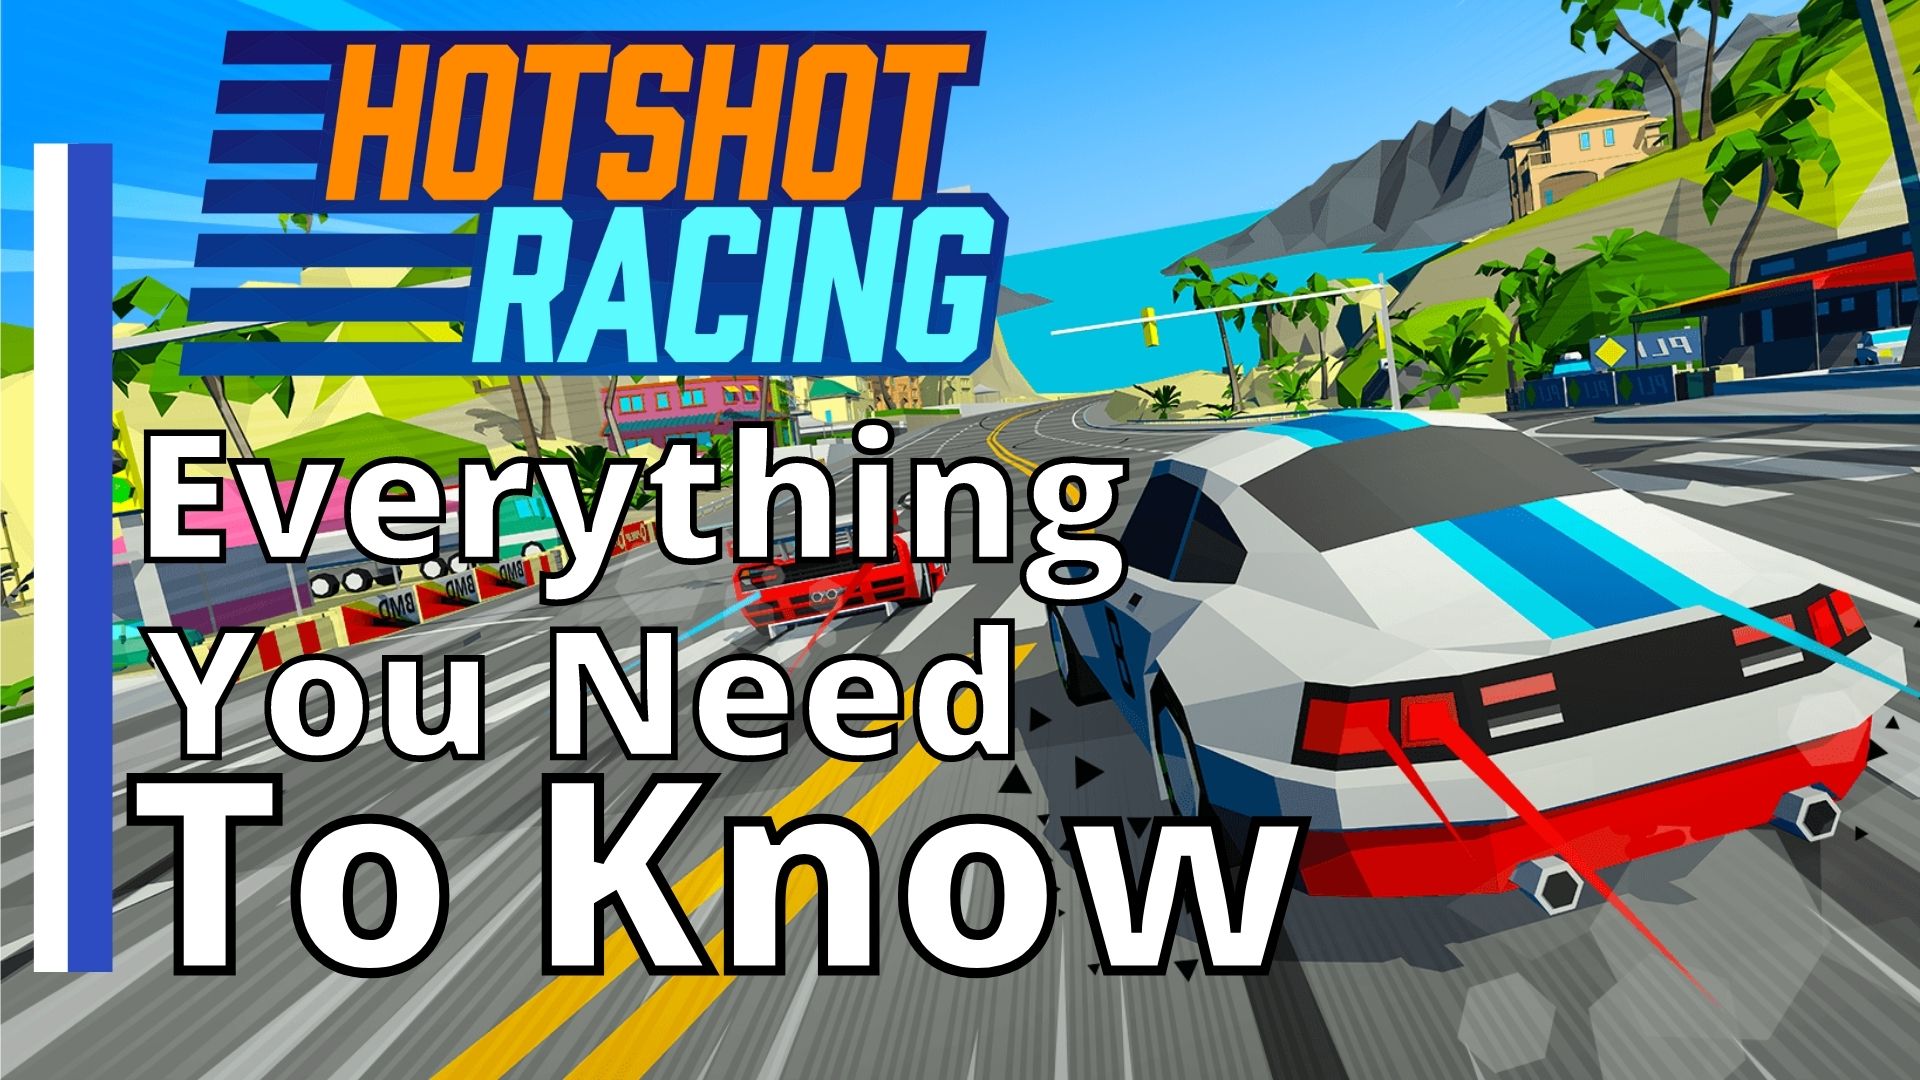 Hotshot Racing - Everything You Need to Know